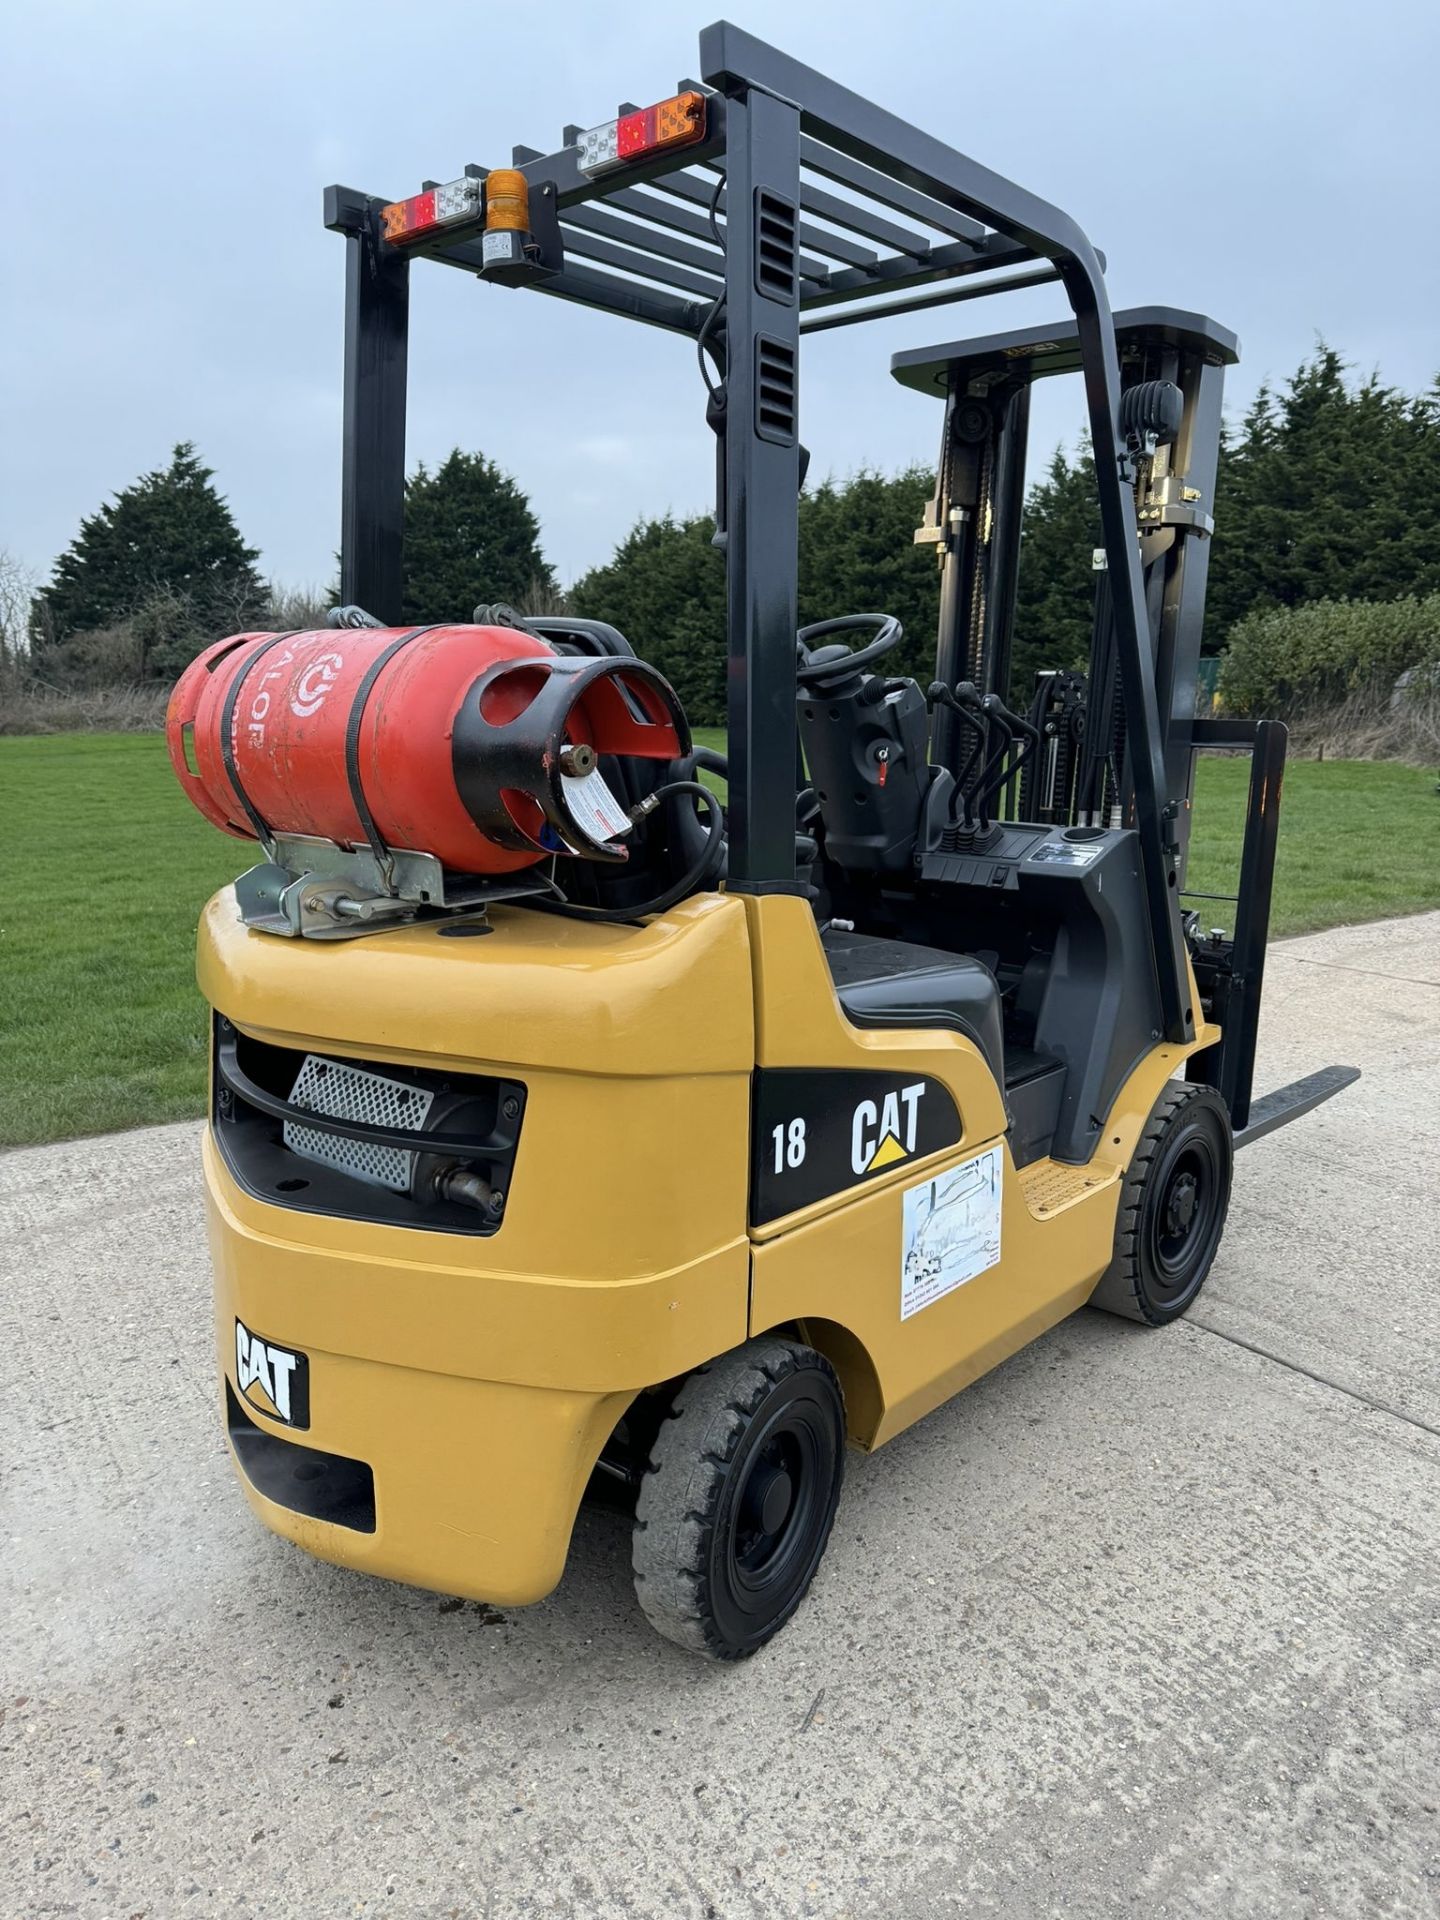 2018 CATERPILLAR 1.8 Tonne Gas Forklift Truck (Container) Triple Mast - Image 6 of 9